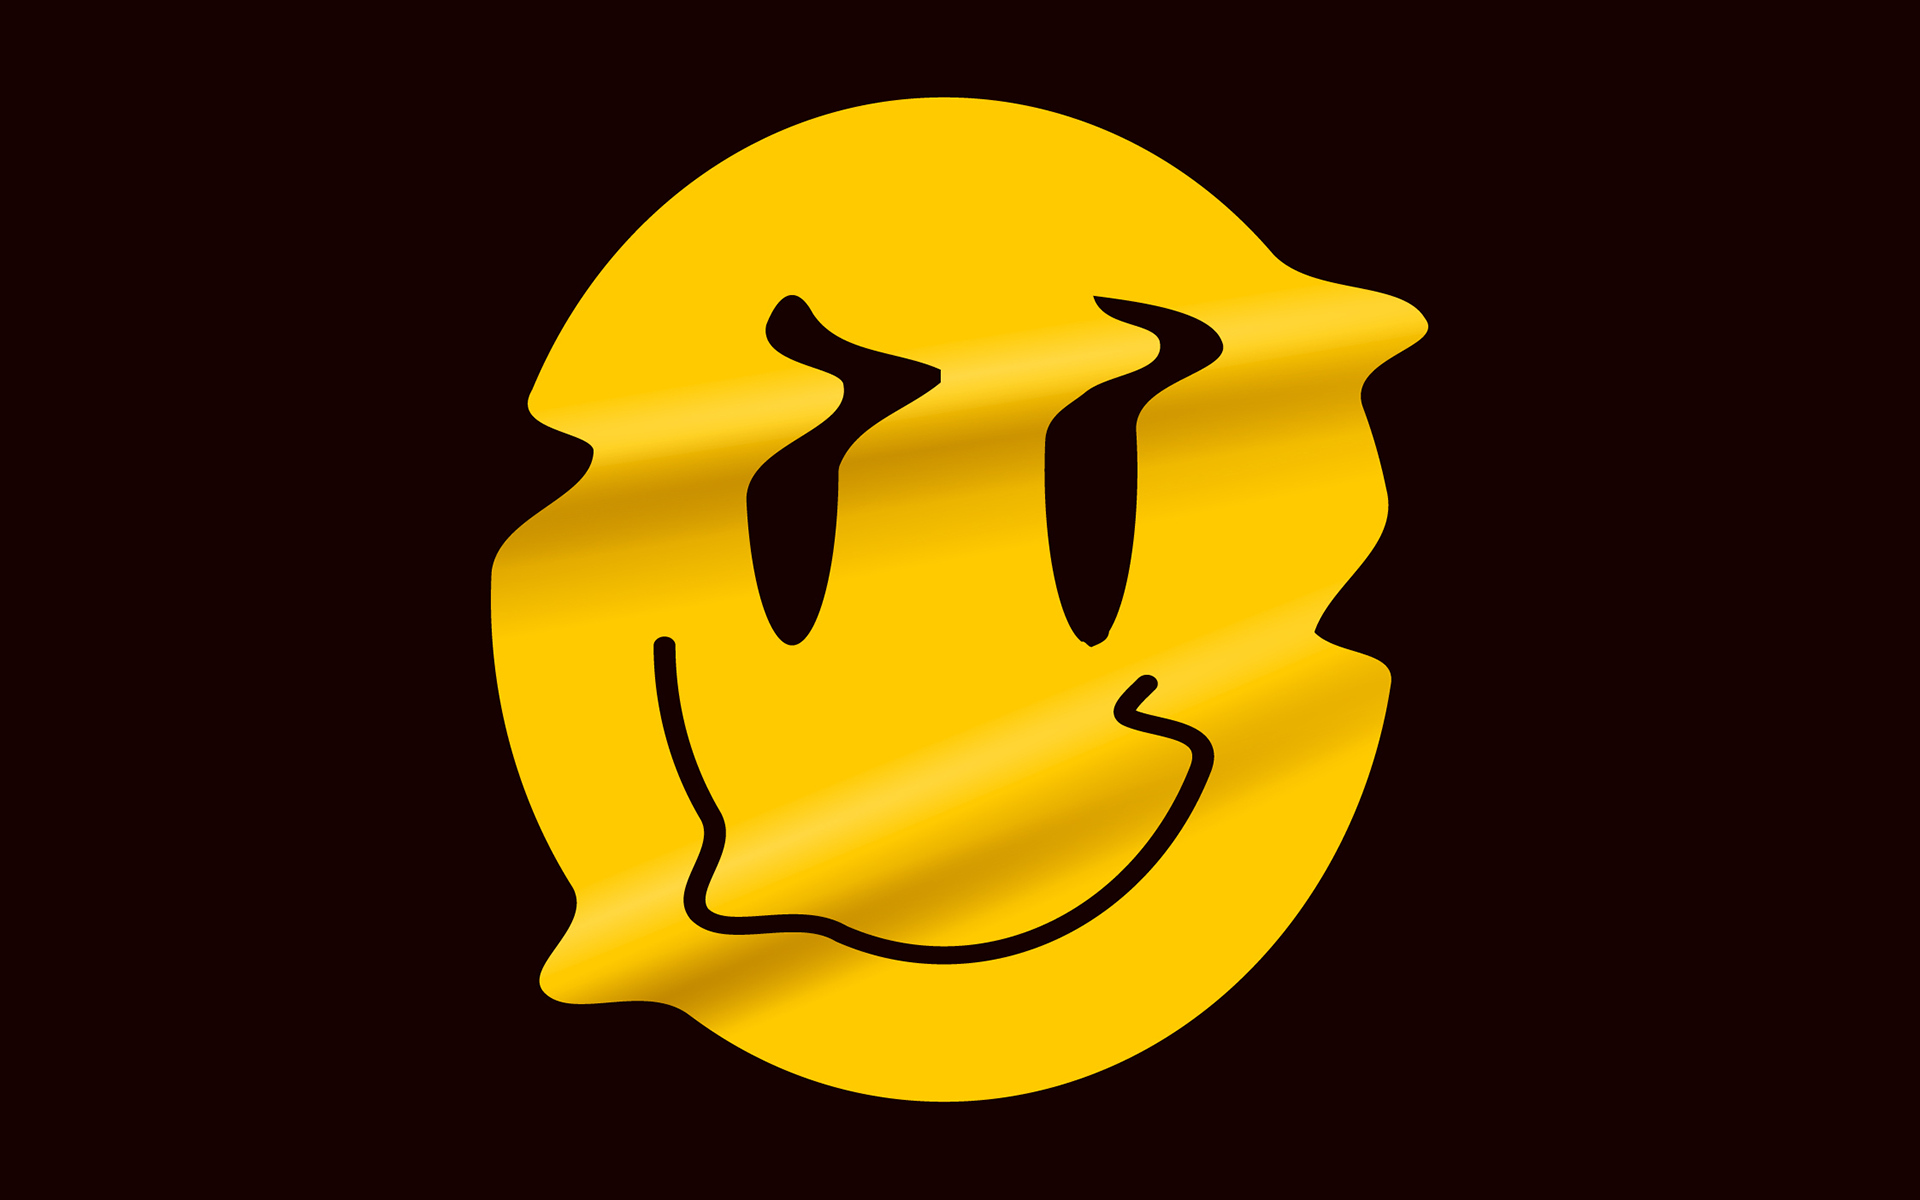 Illustration of a yellow smiley face on a black background, looking as if it's drawn on slightly folded paper so the face is distorted.